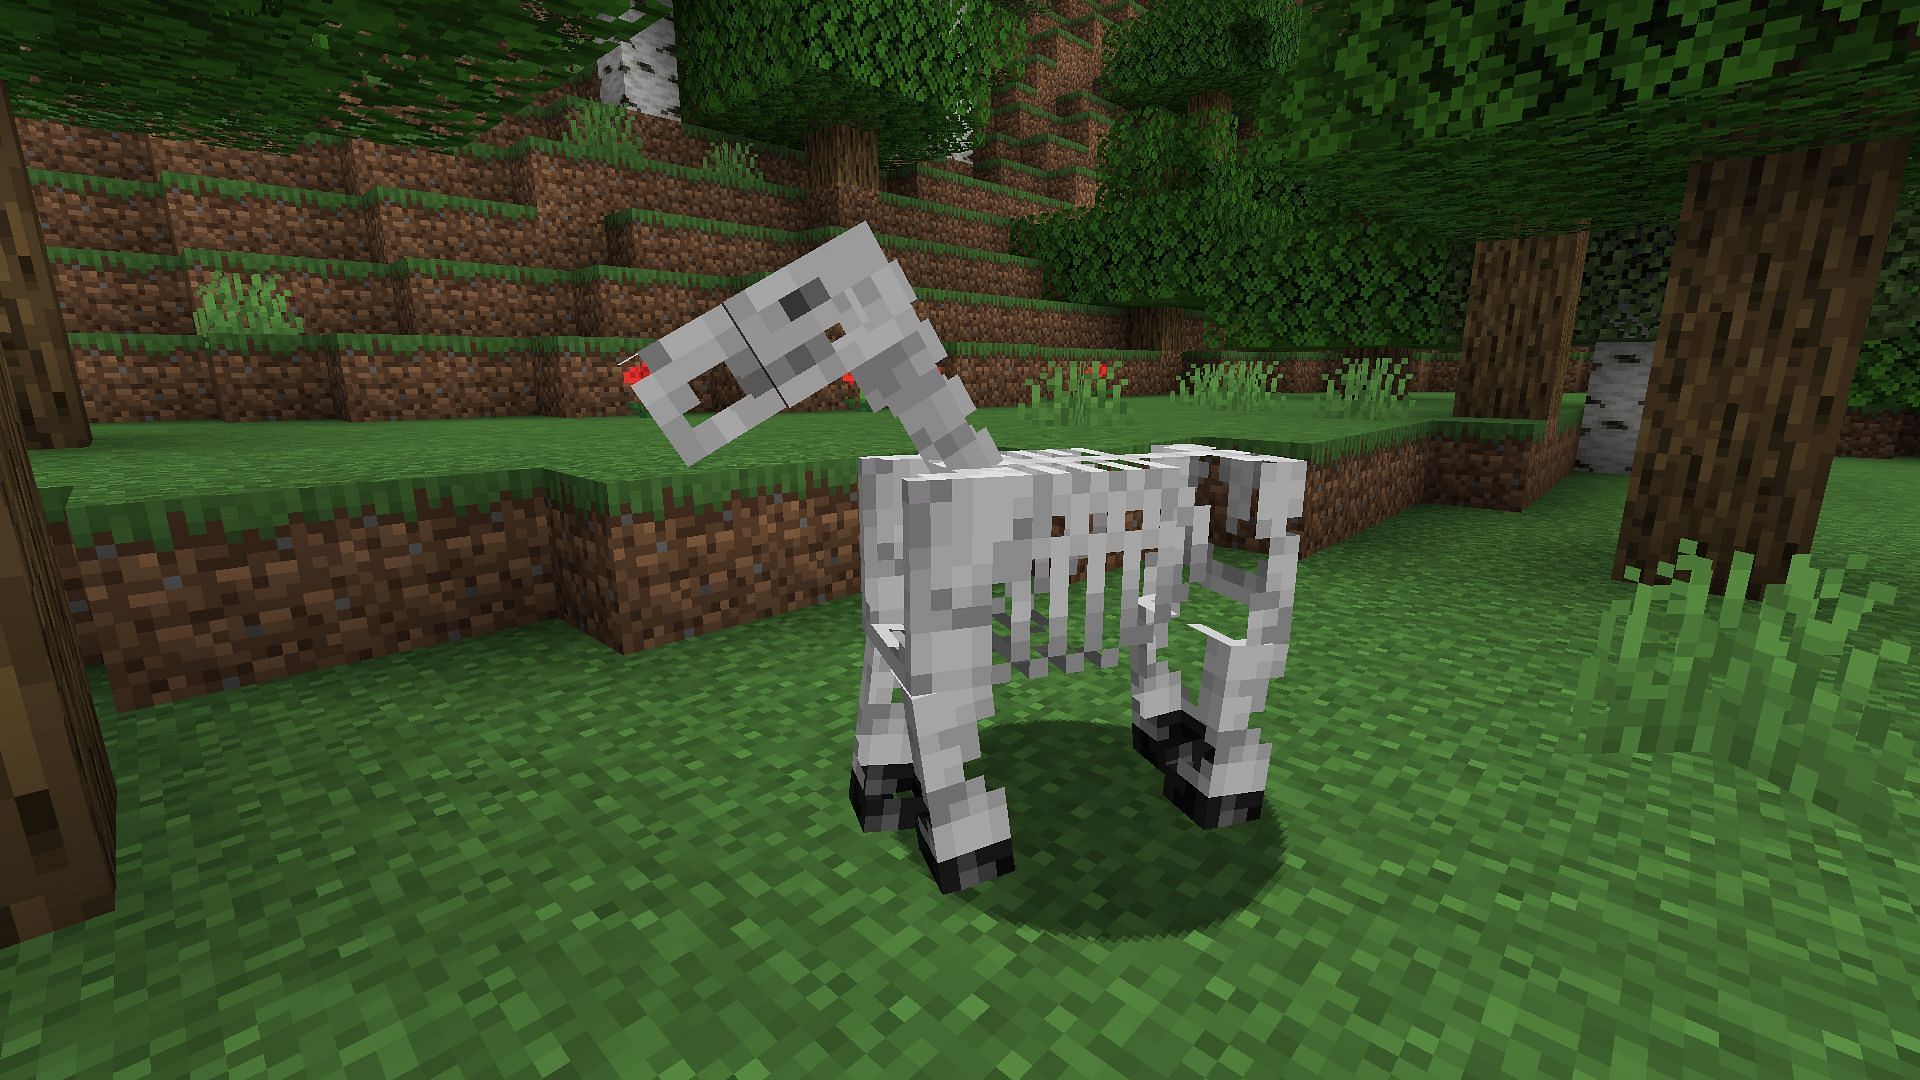 A skeleton horse in a forest (Image via Mojang Studios)